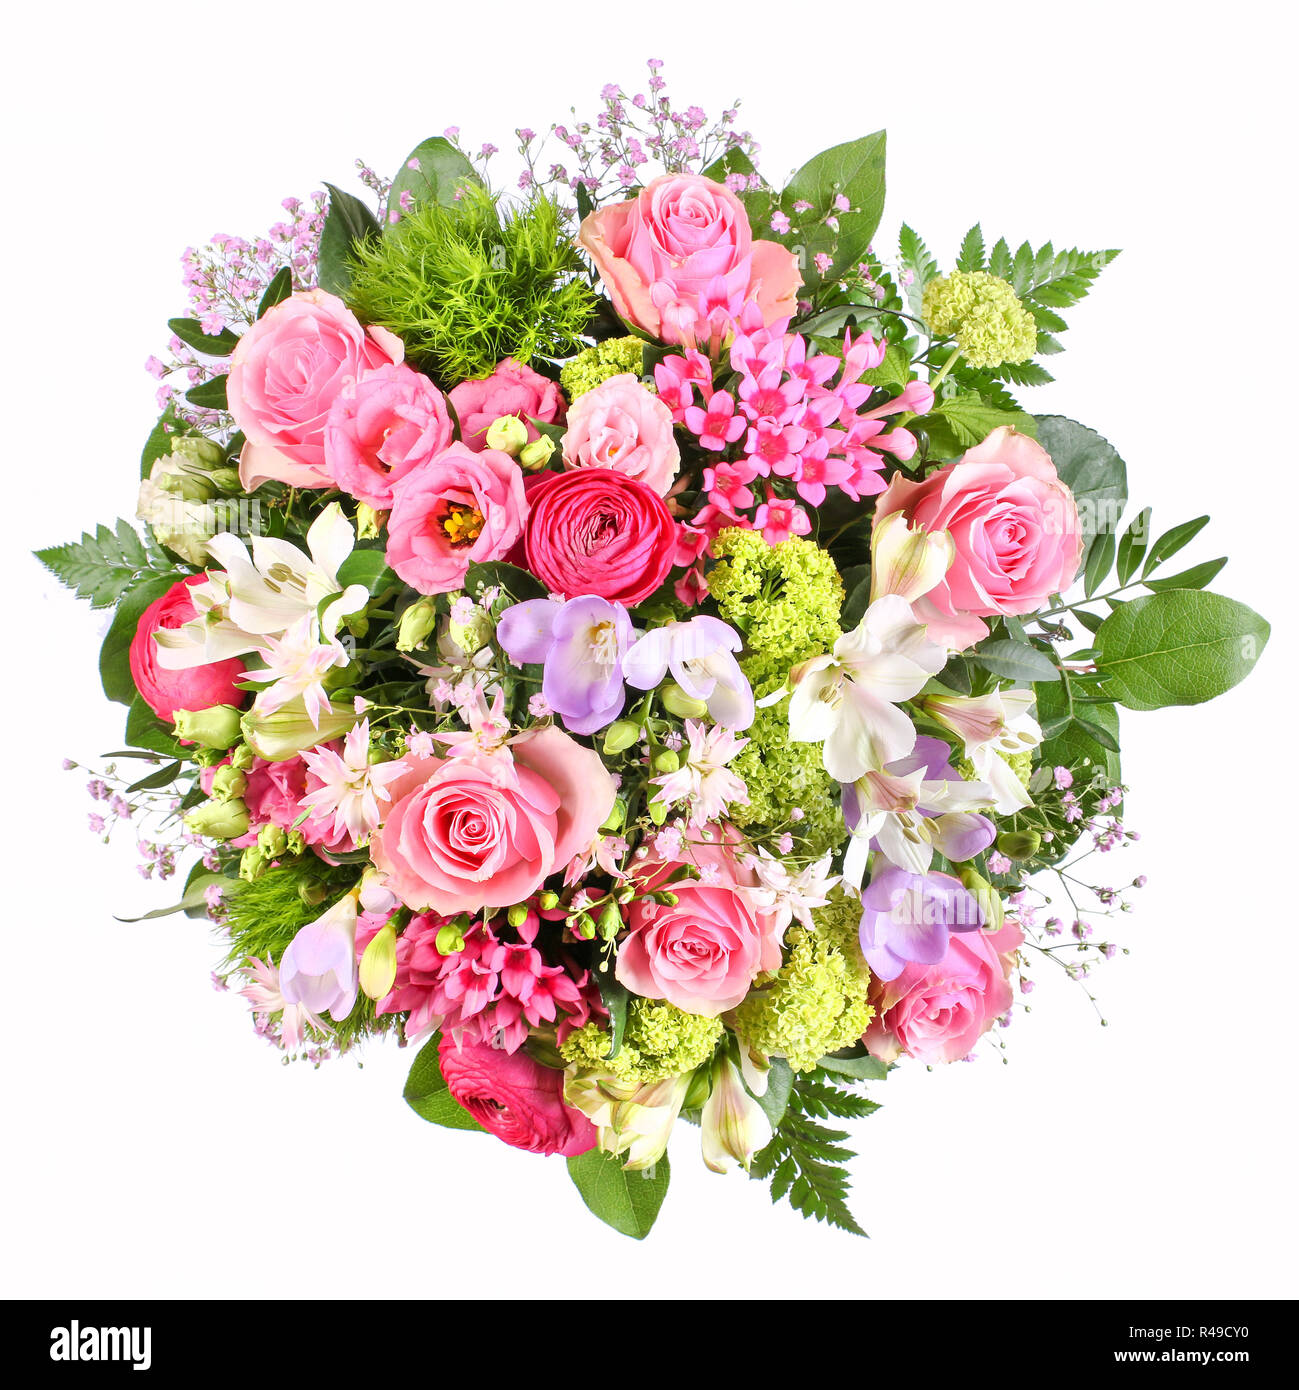 bouquet with roses and ranunculus Stock Photo